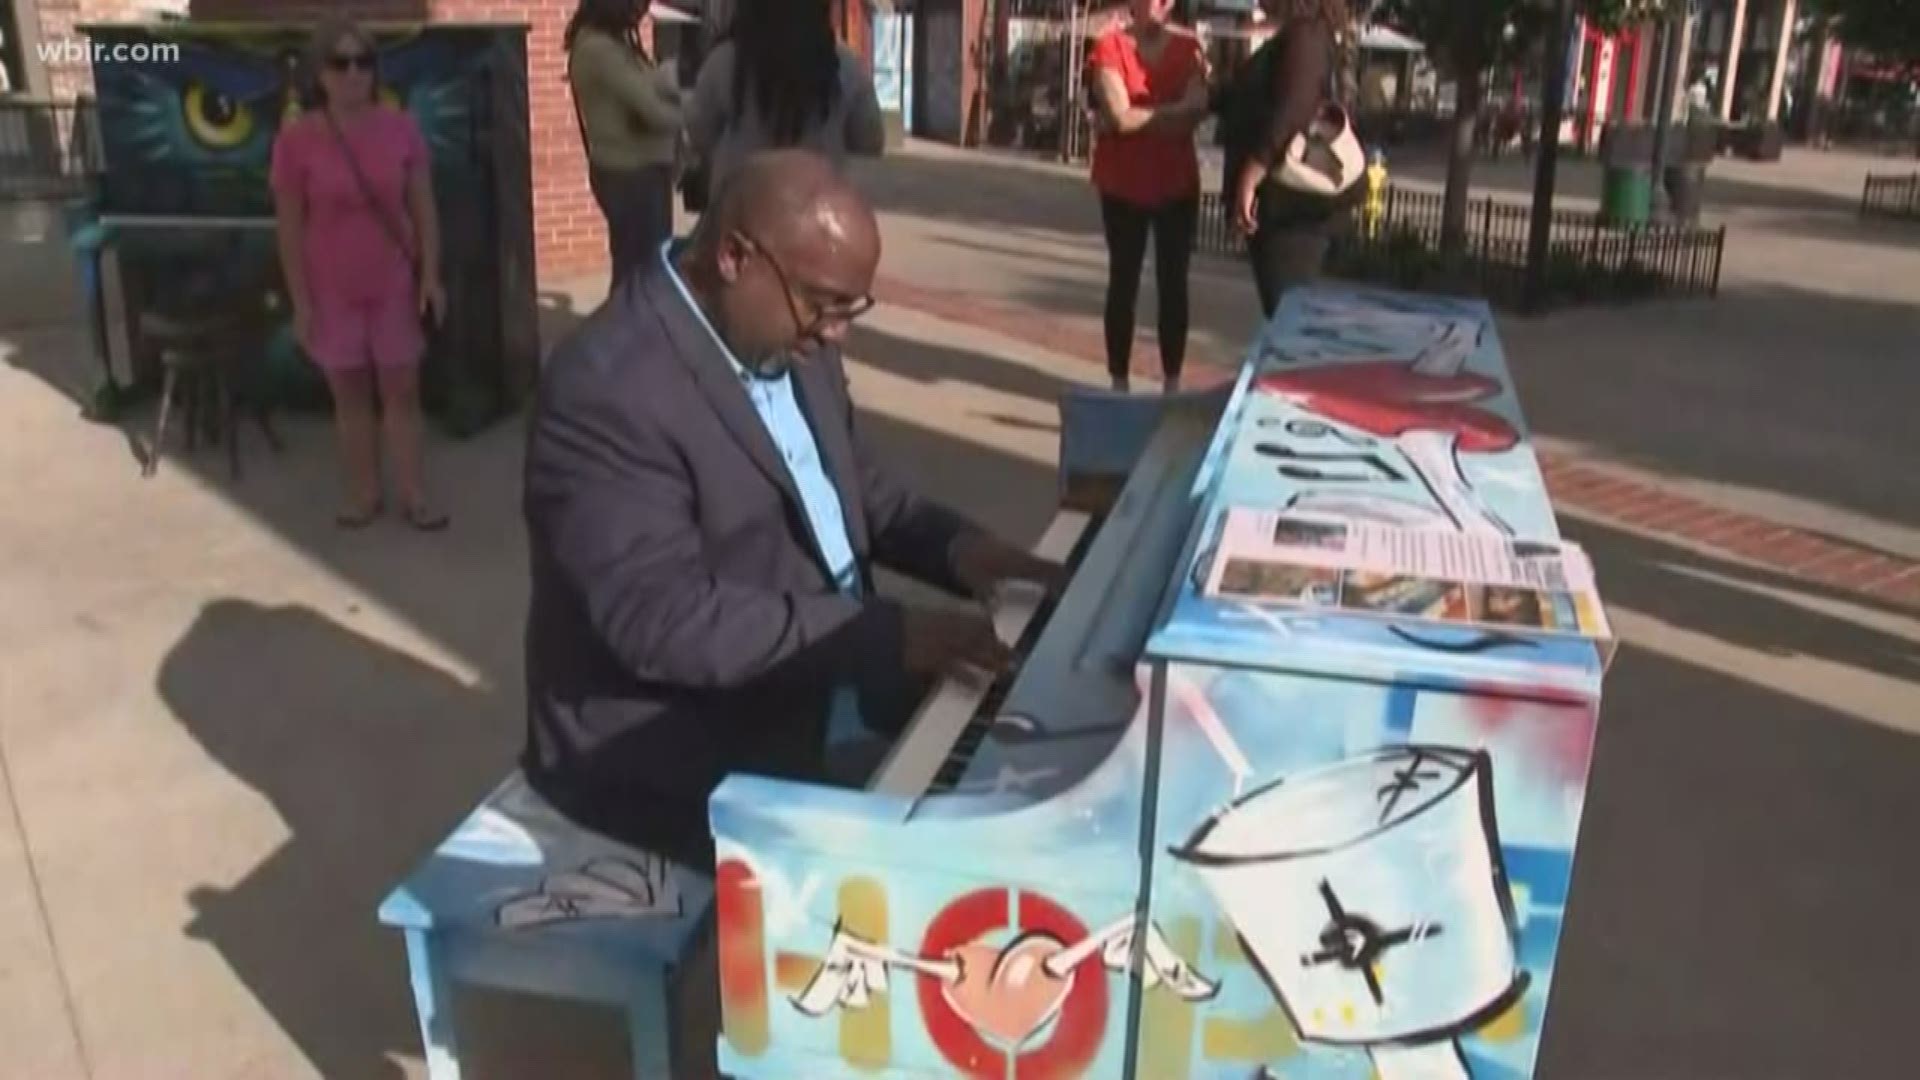 Brian Clay presented the first three decorated pianos, and attendees had the opportunity to meet the artists and play and listen to piano music.